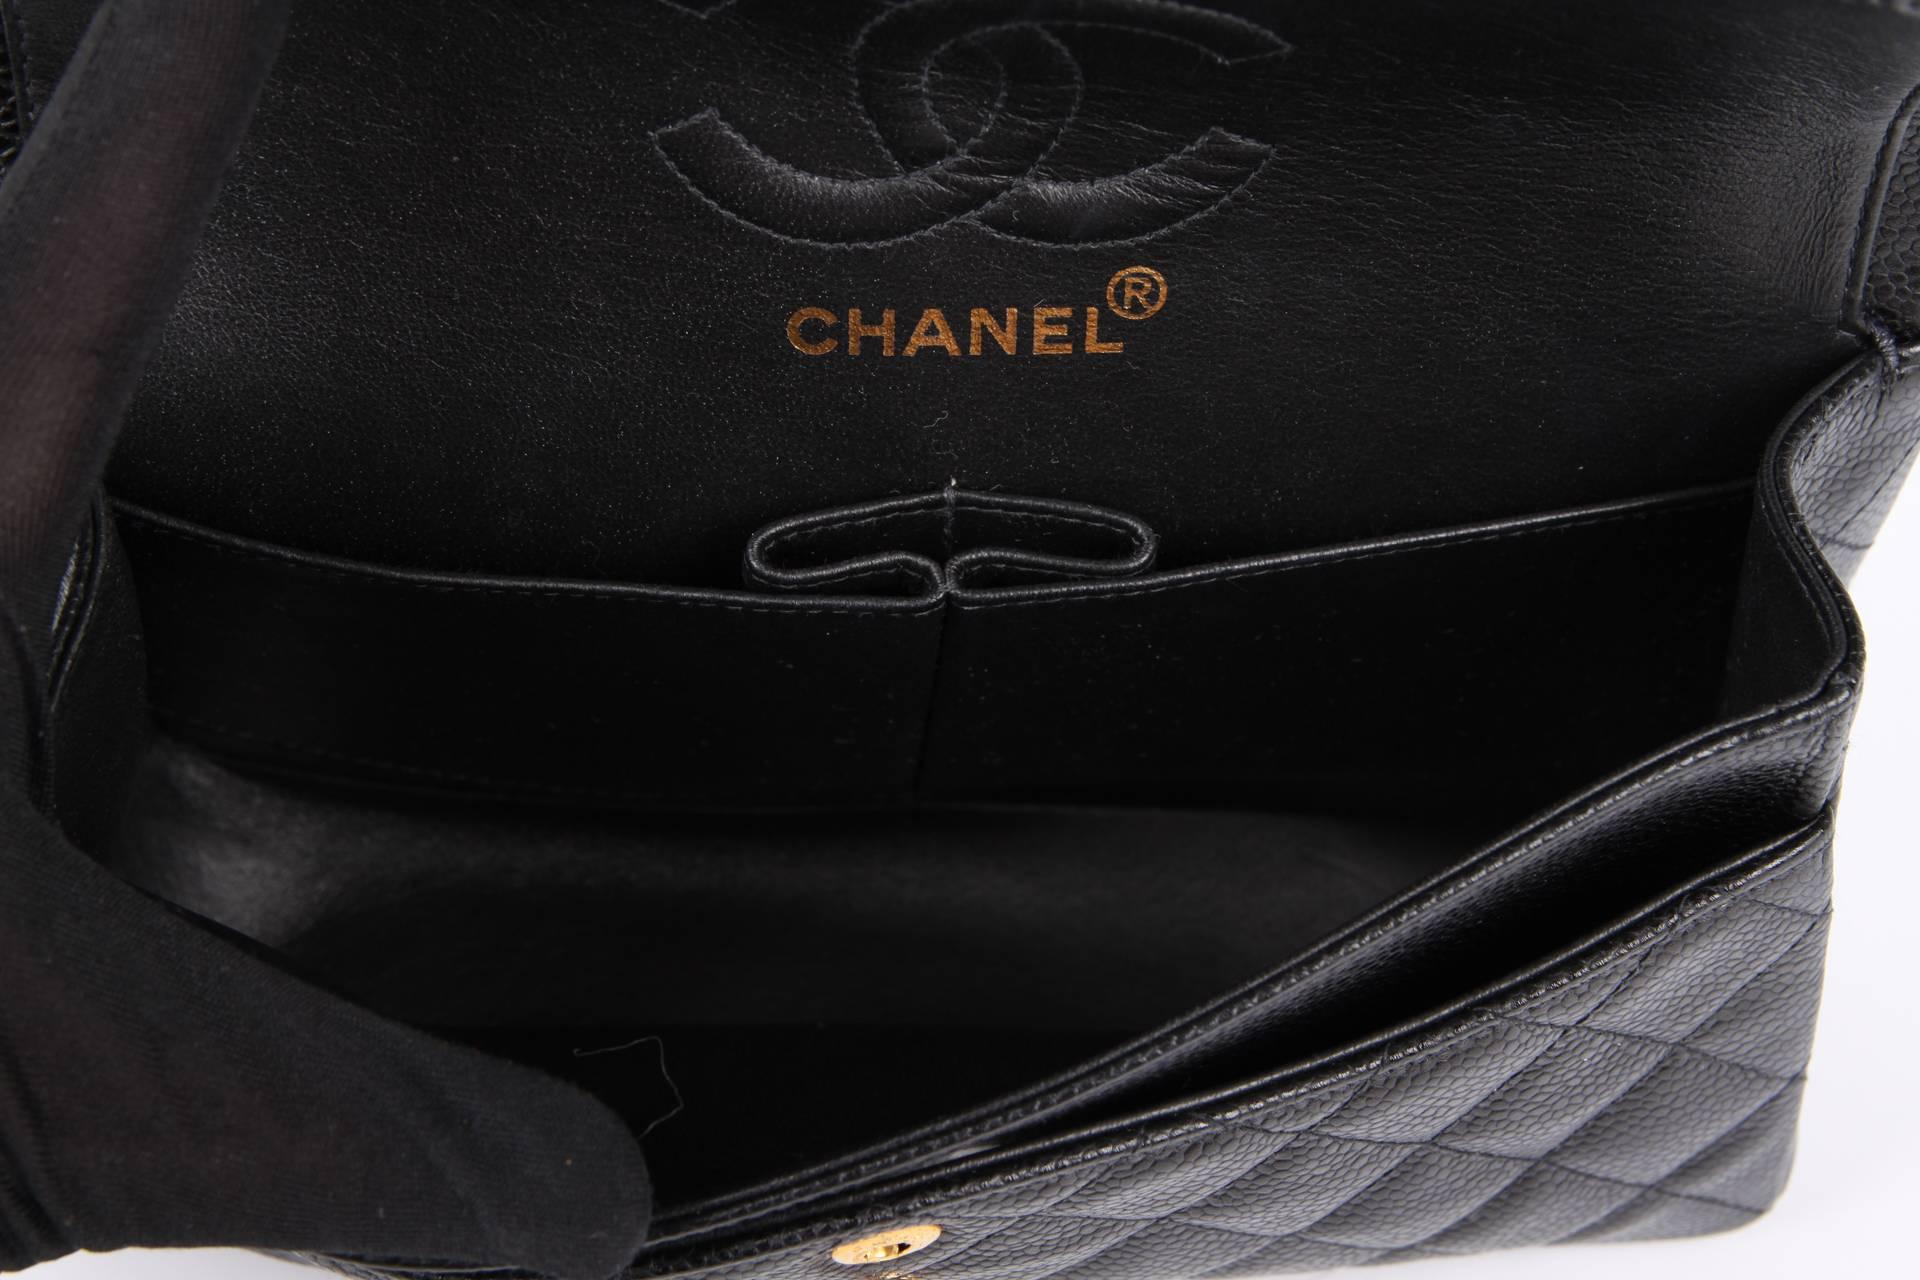 Black Chanel 2.55 Timeless Small Double Flap Bag - black caviar leather